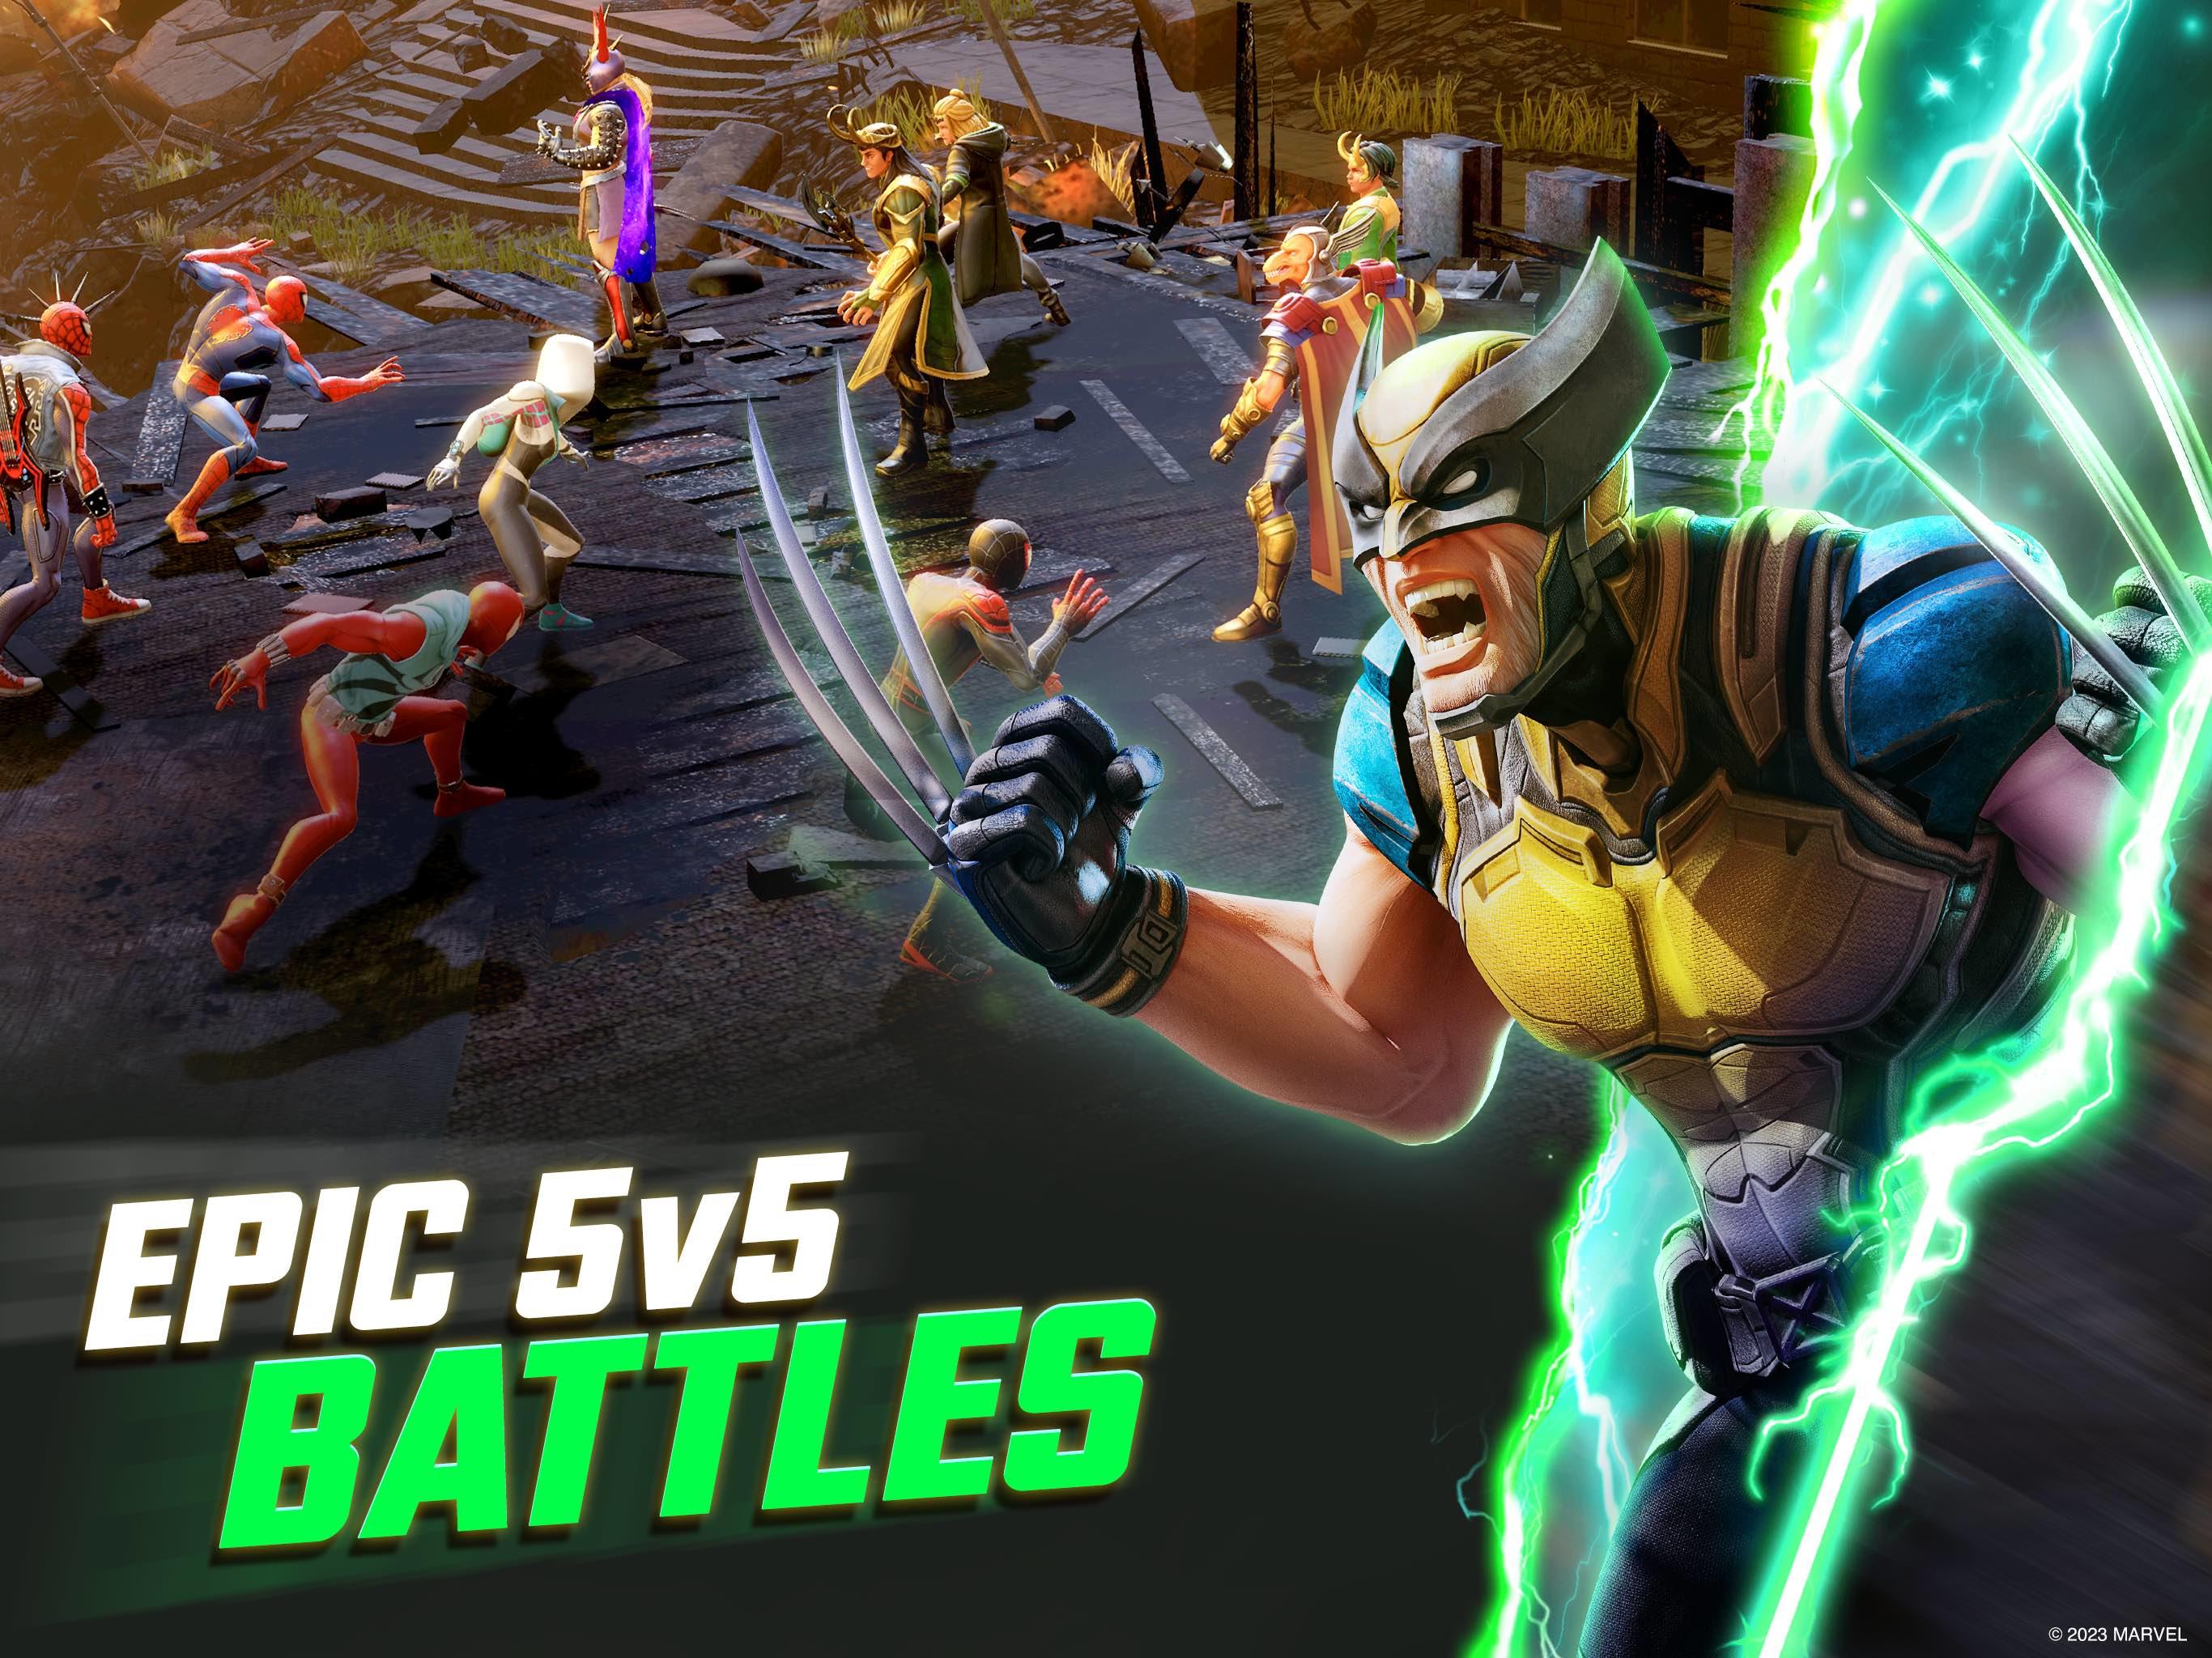 MARVEL Strike Force: Squad RPG -  - Android & iOS